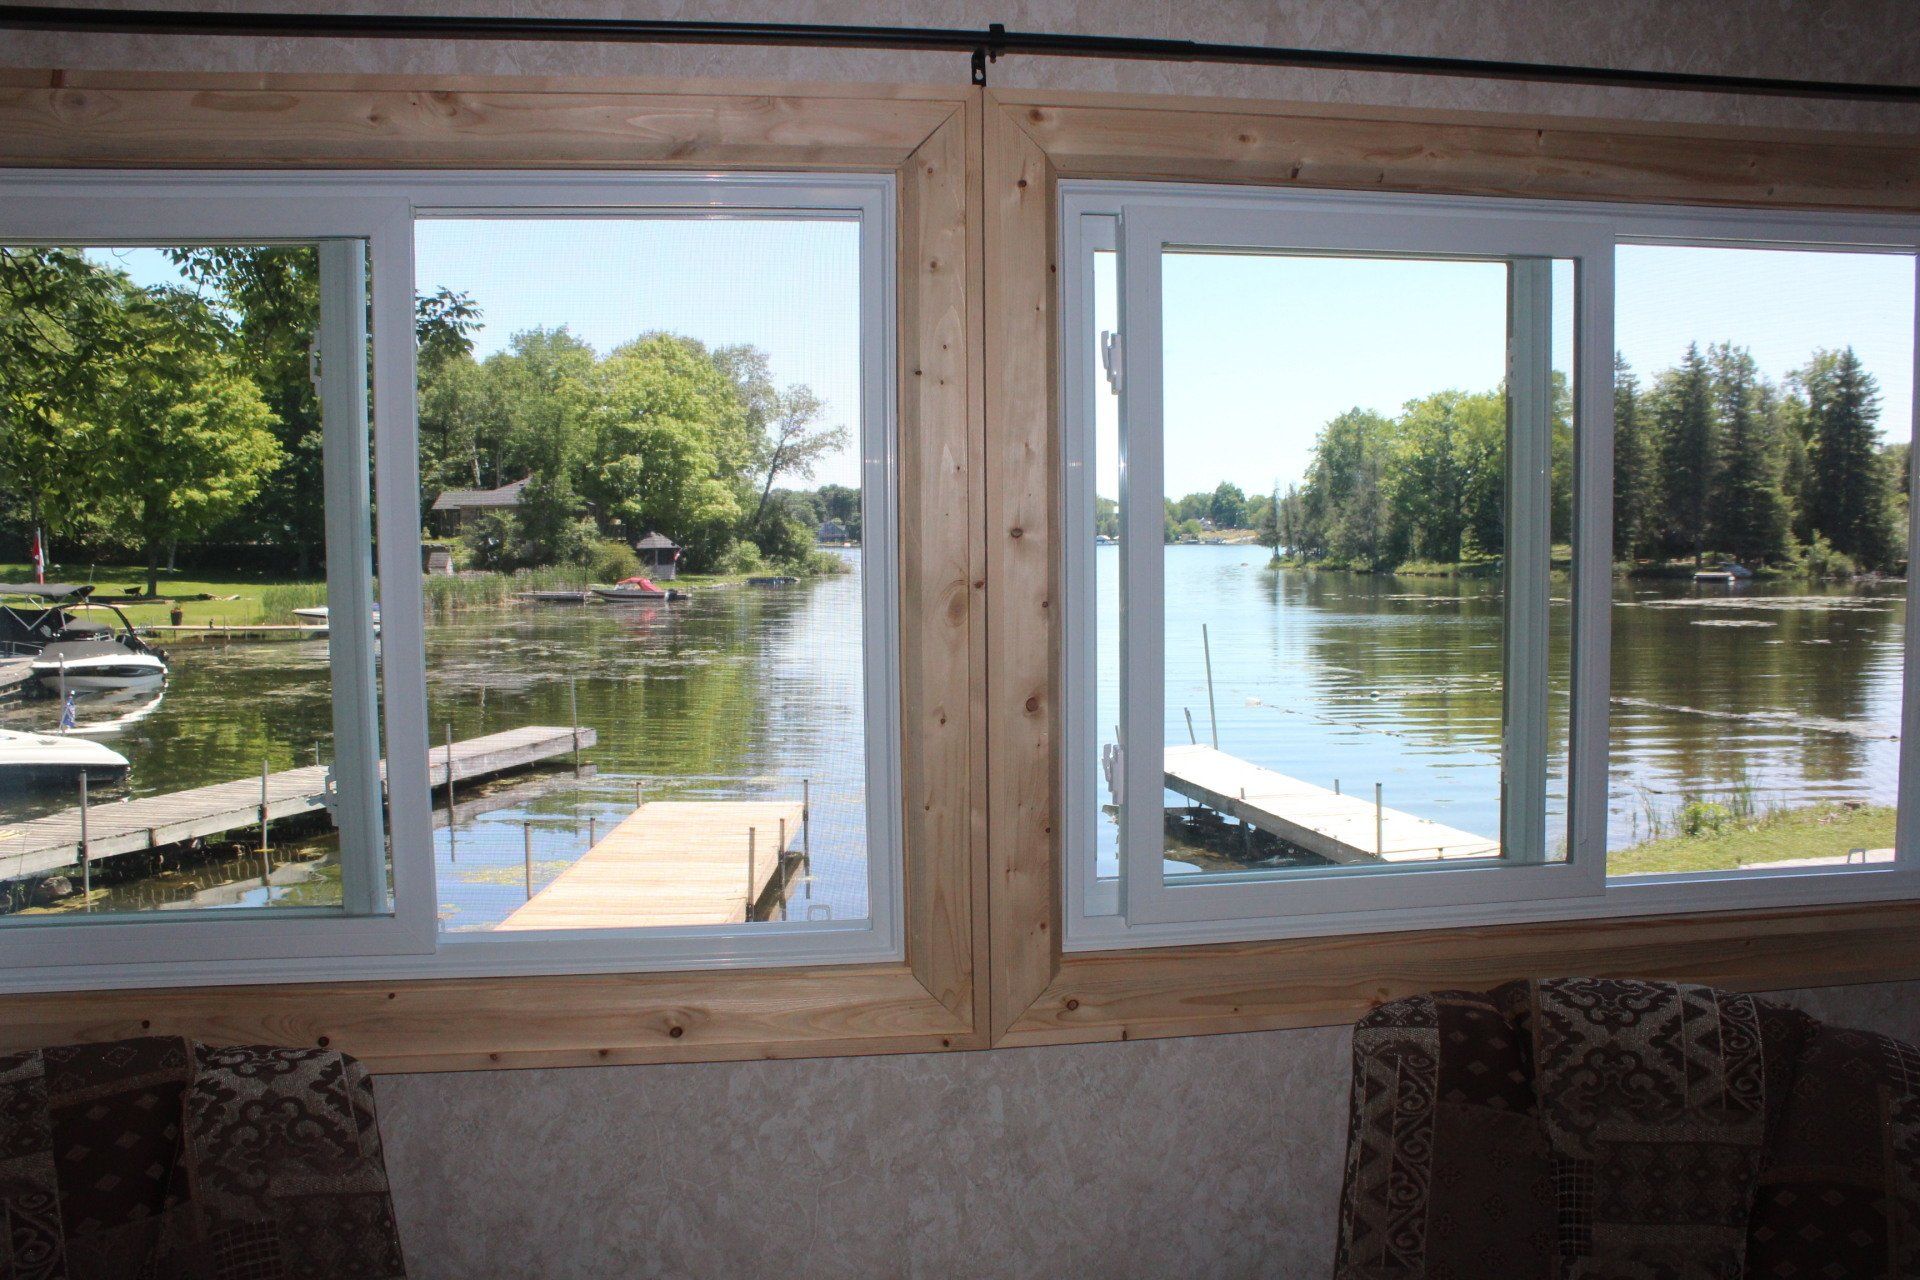 A window with a view of a lake and a dock